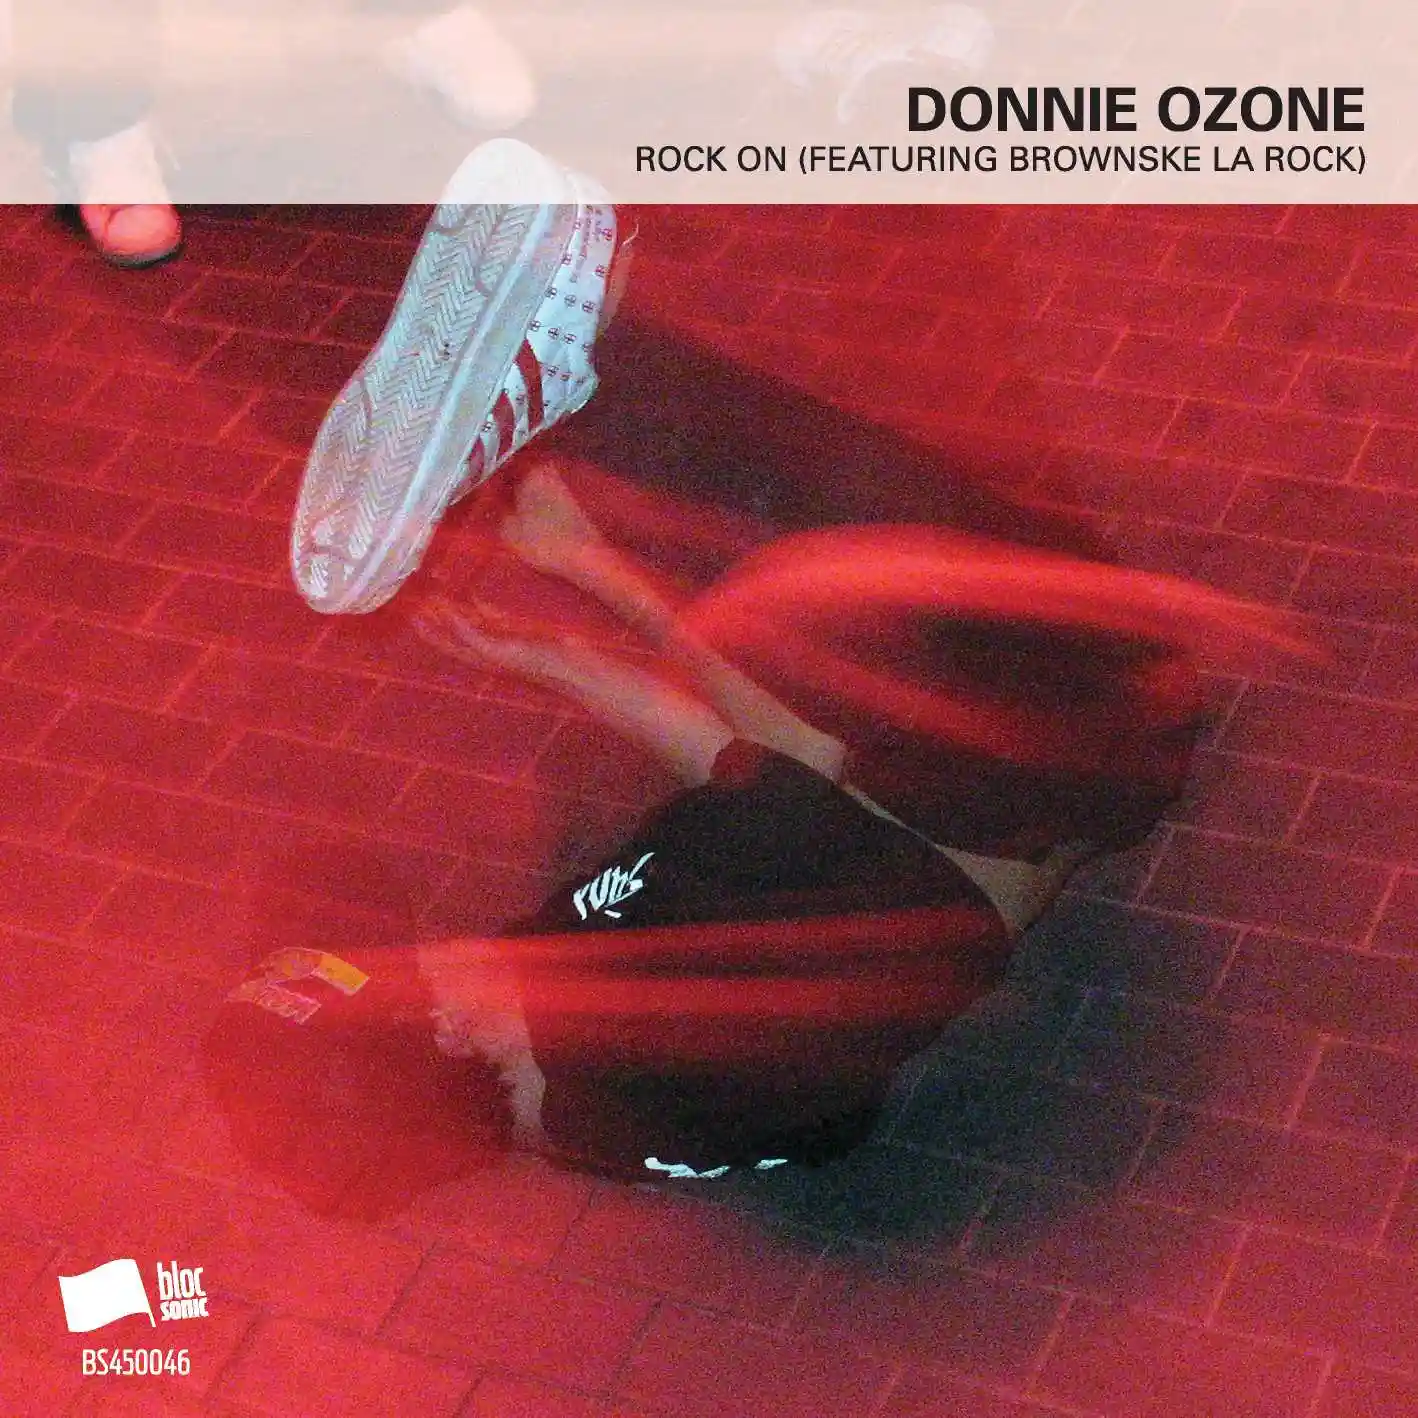 Album cover for “Rock On (Featuring Brownske La Rock)” by Donnie Ozone